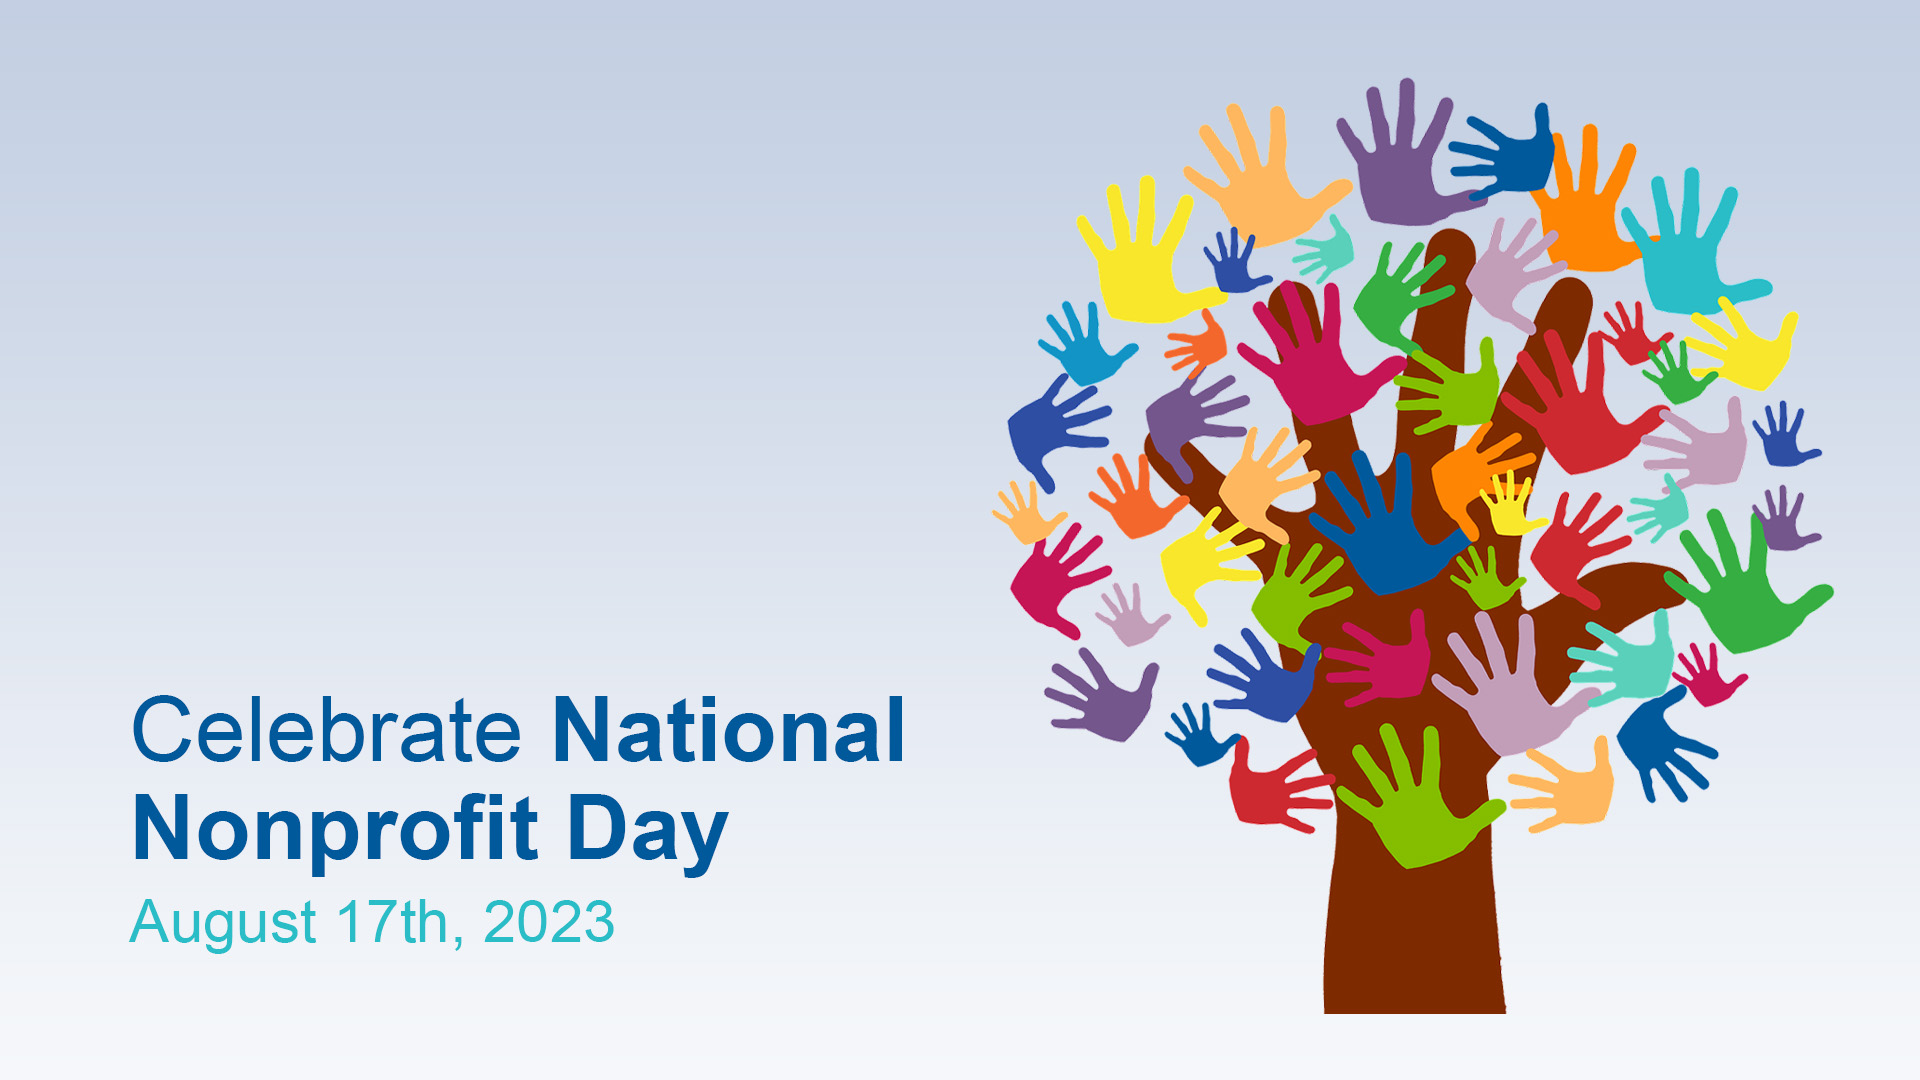 Background is a ligth blue gradient. on the bottom left of the image there's text that reads Celebrate National Nonprofit Day August 17th, 2023. This text is in a blue sans serif font. on the right side of the image there is a tree made up of hands. Instead of leaves there are different sized and colored hands overlapping.